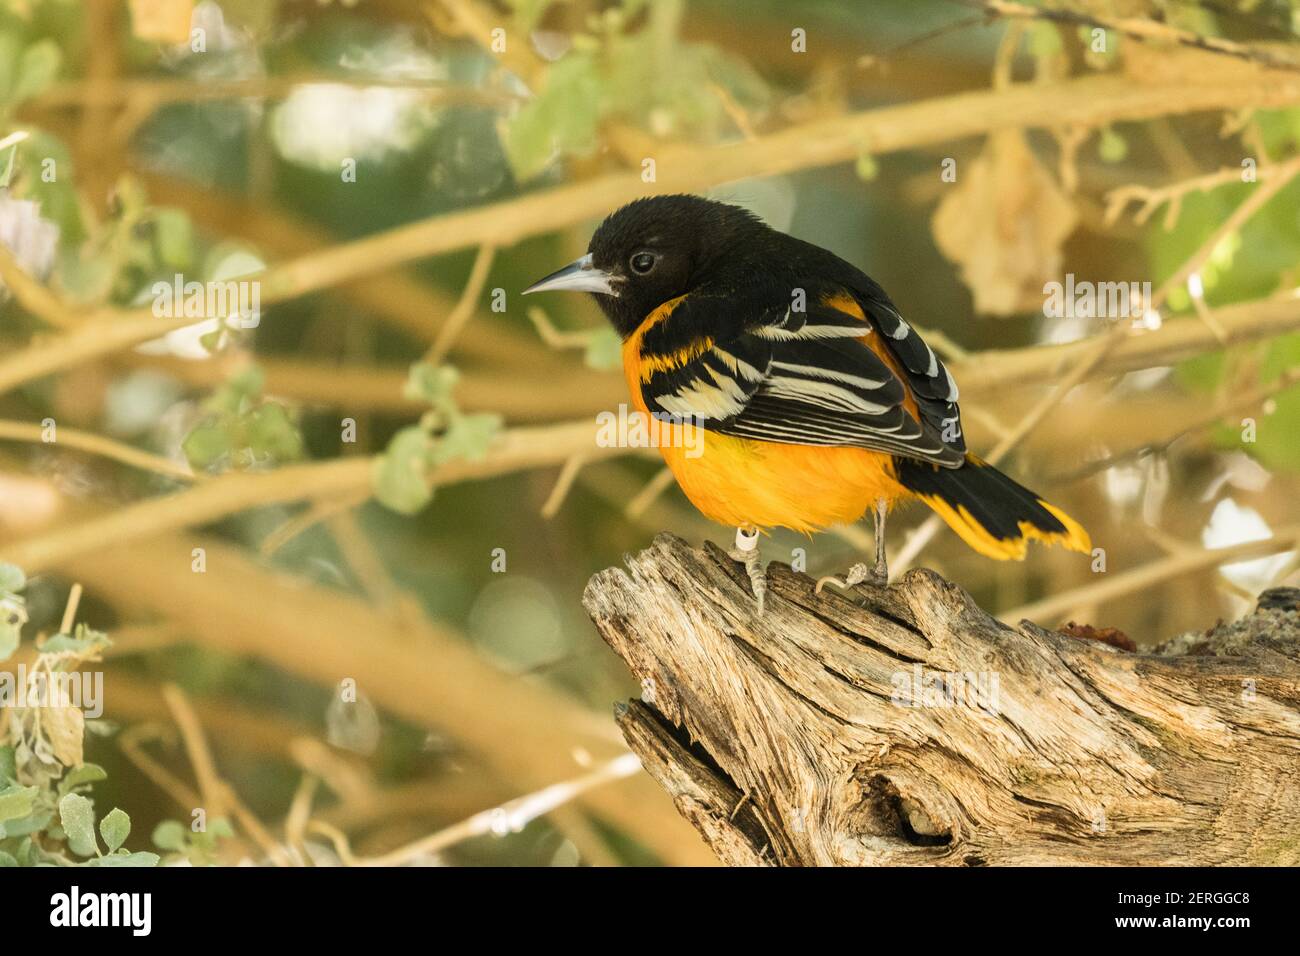 Bullock's Oriole, Icterus bullockii, is a small member of the blackbird family found in the Western U.S. and Mexico. Stock Photo